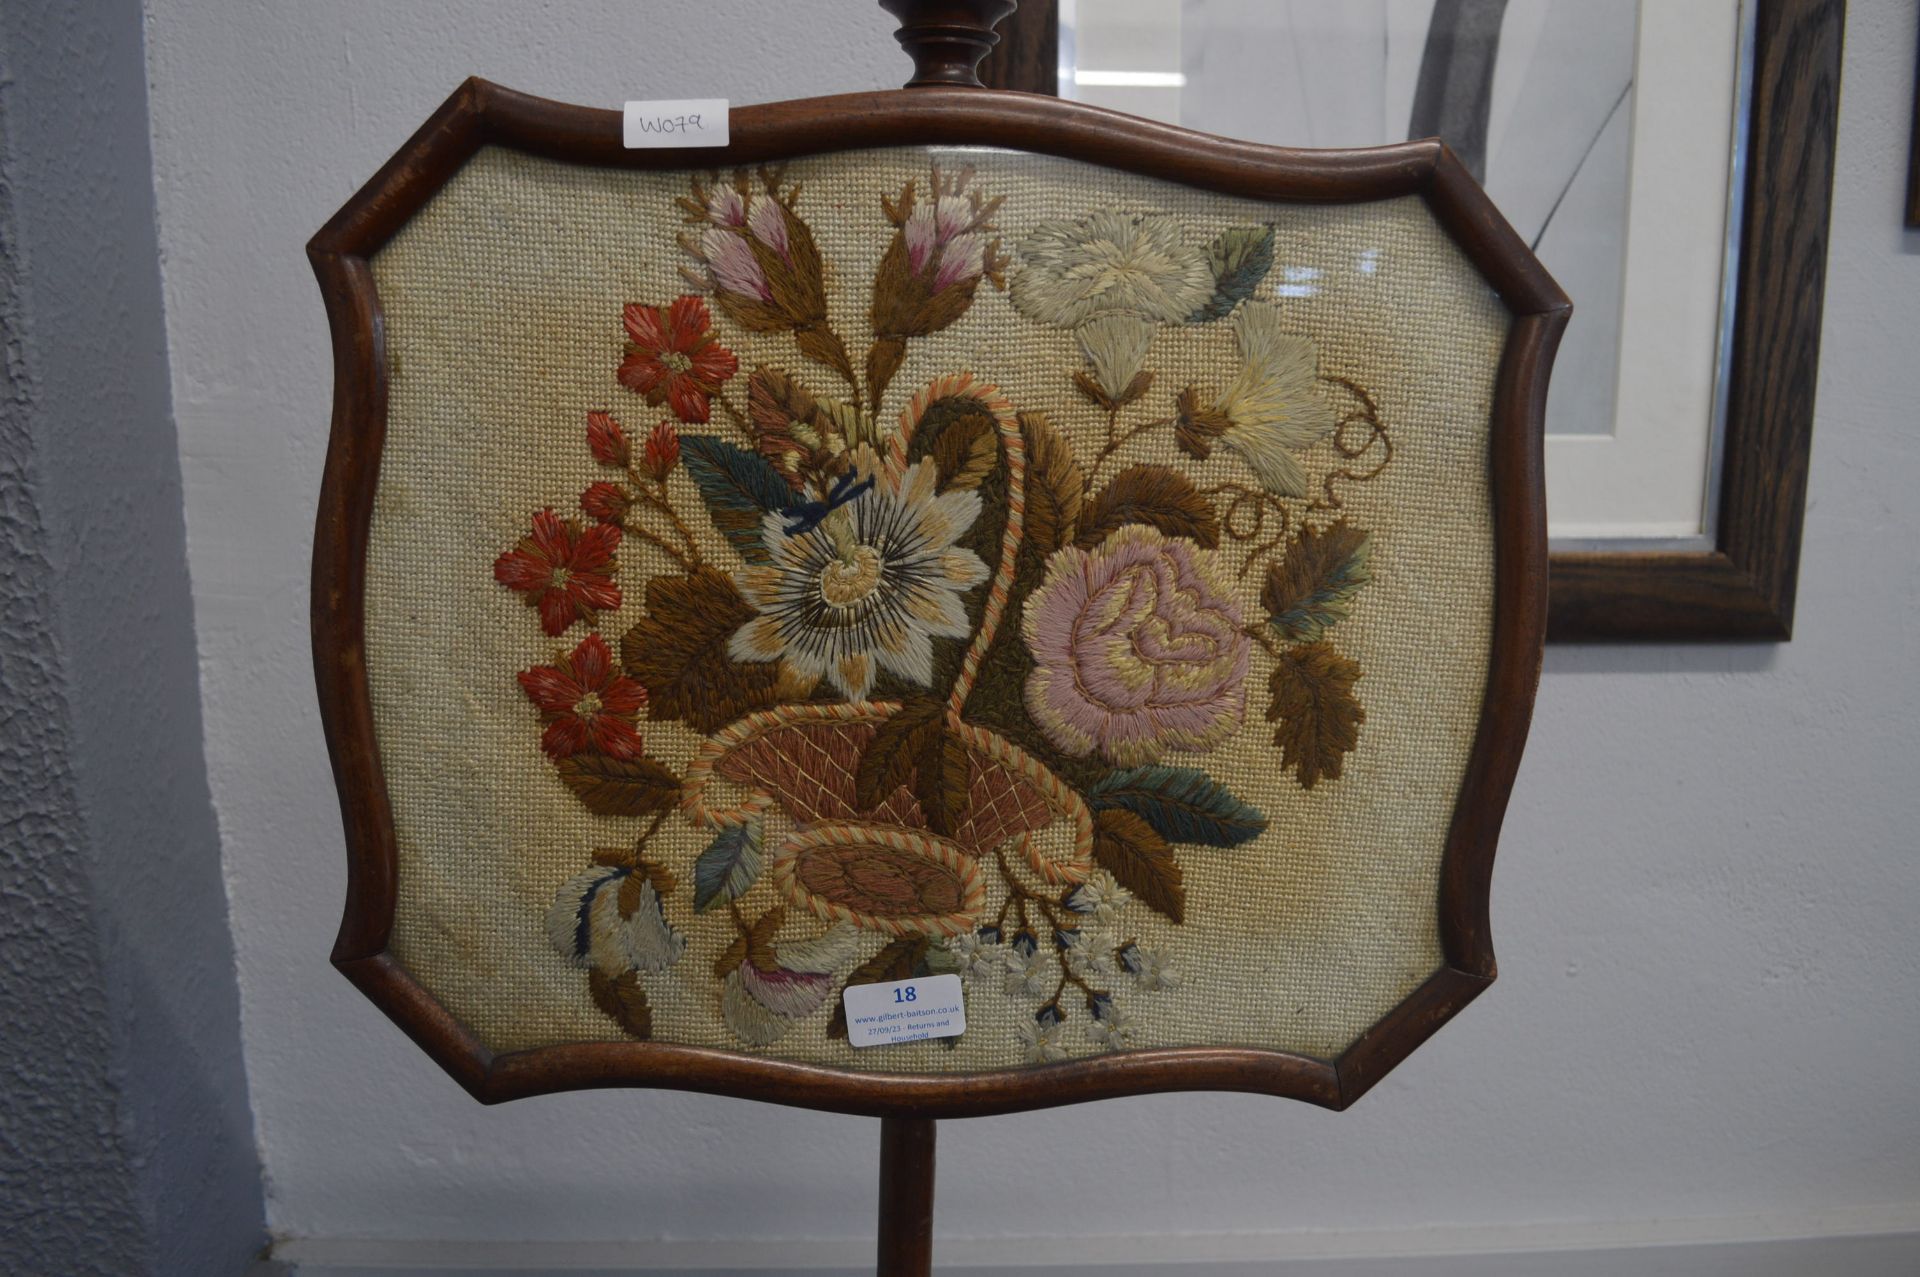 Victorian Turned Mahogany Pole Screen with Floral Embroidery Design - Image 2 of 2